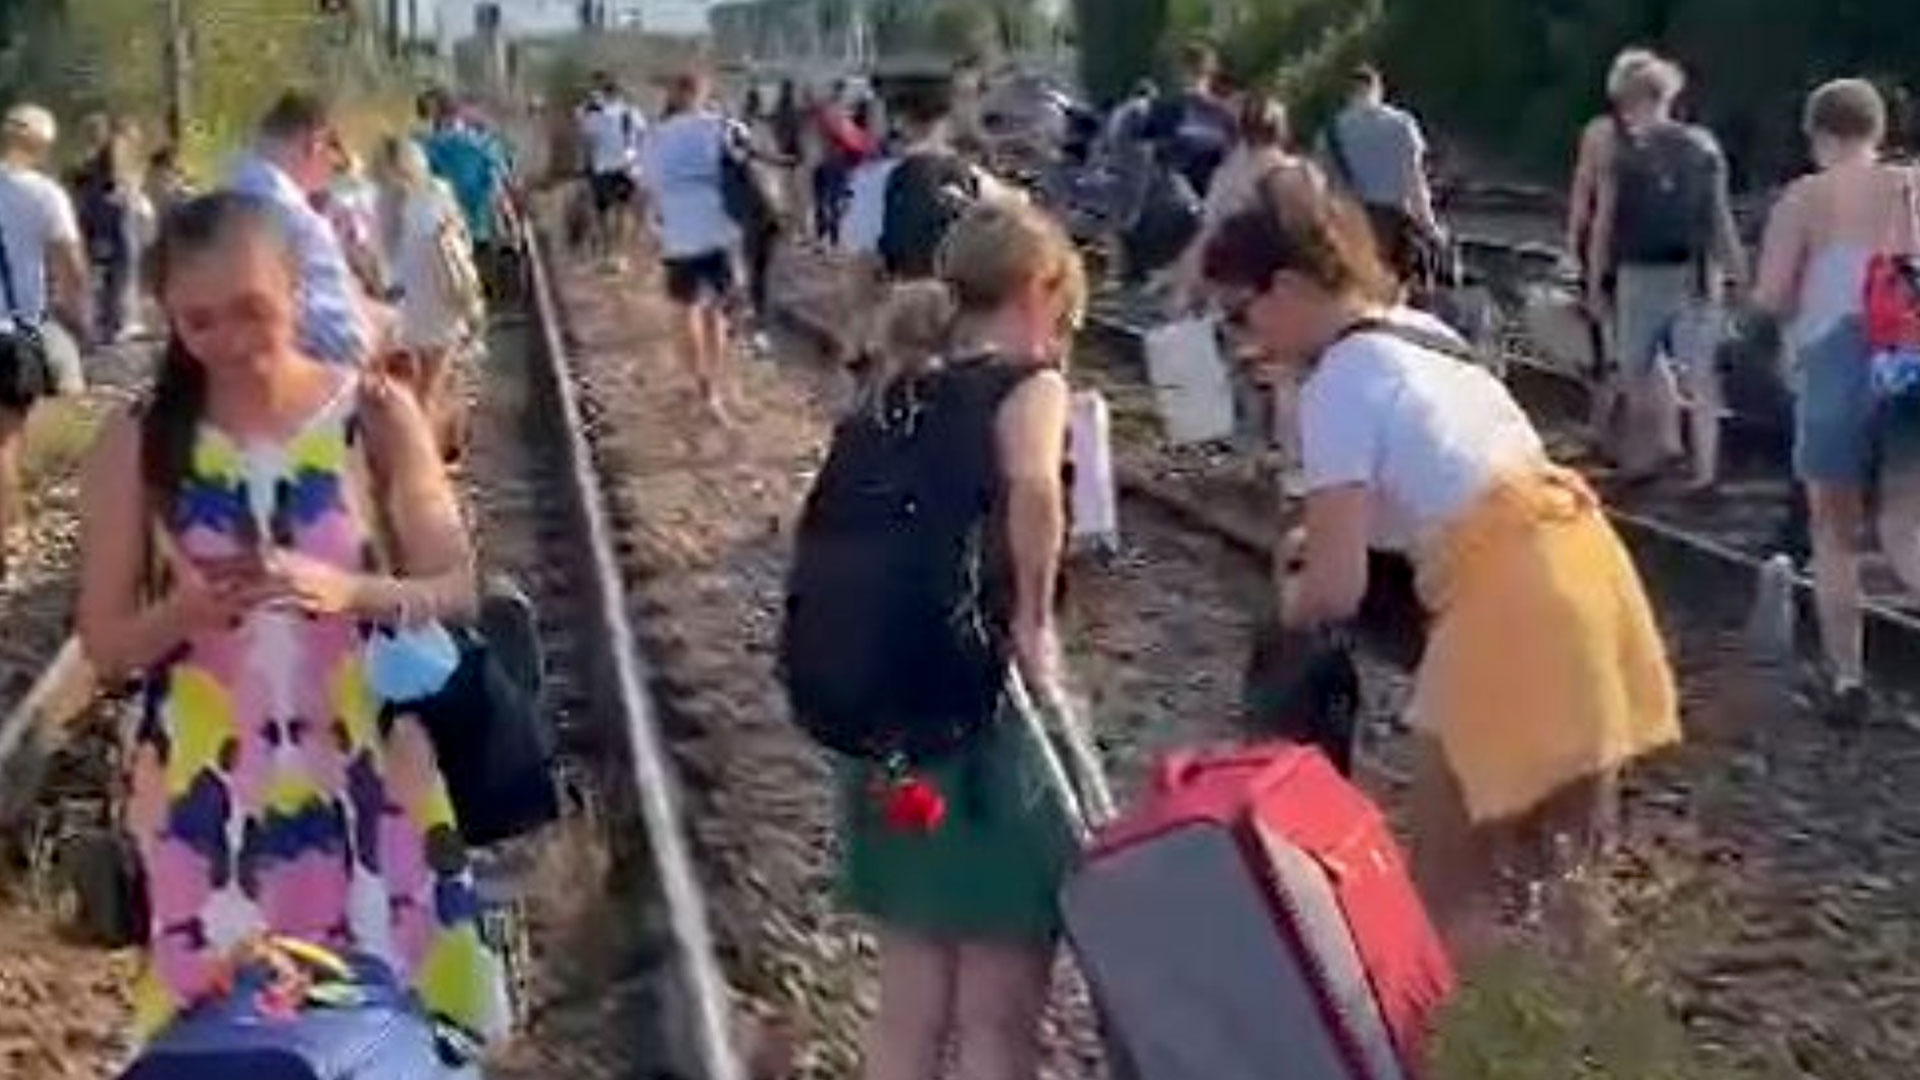 As the train to Stansted Airport crashes in heatwave, Brits are forced to carry their luggage along TRACK